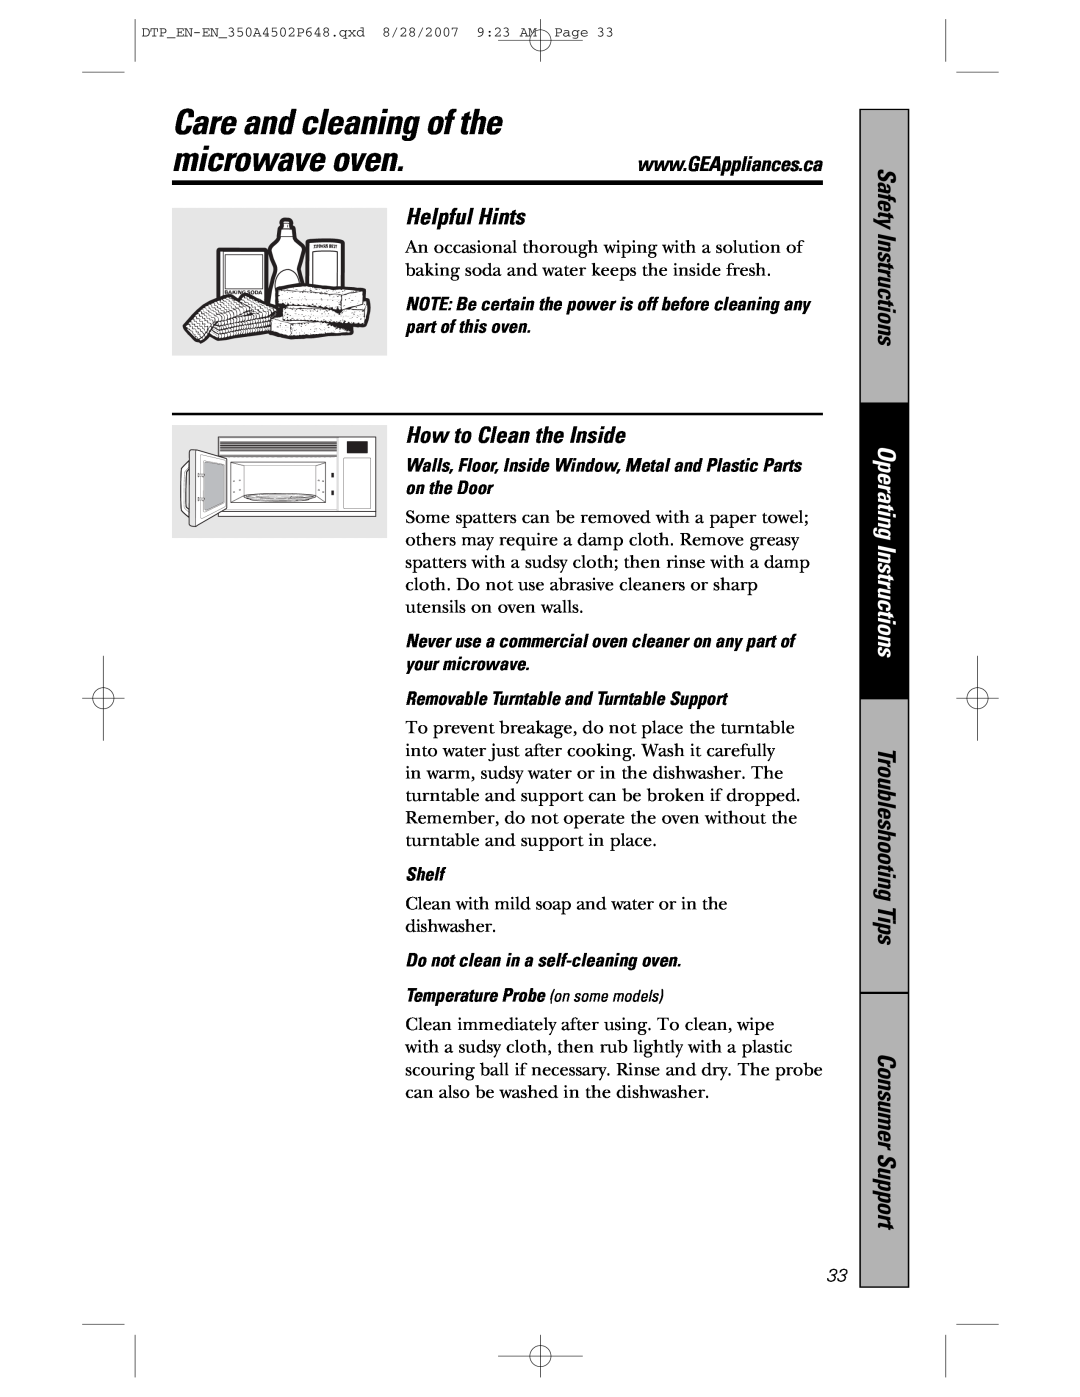 GE pvm1870 Care and cleaning of the, Helpful Hints, How to Clean the Inside, microwave oven, Safety Instructions, Shelf 